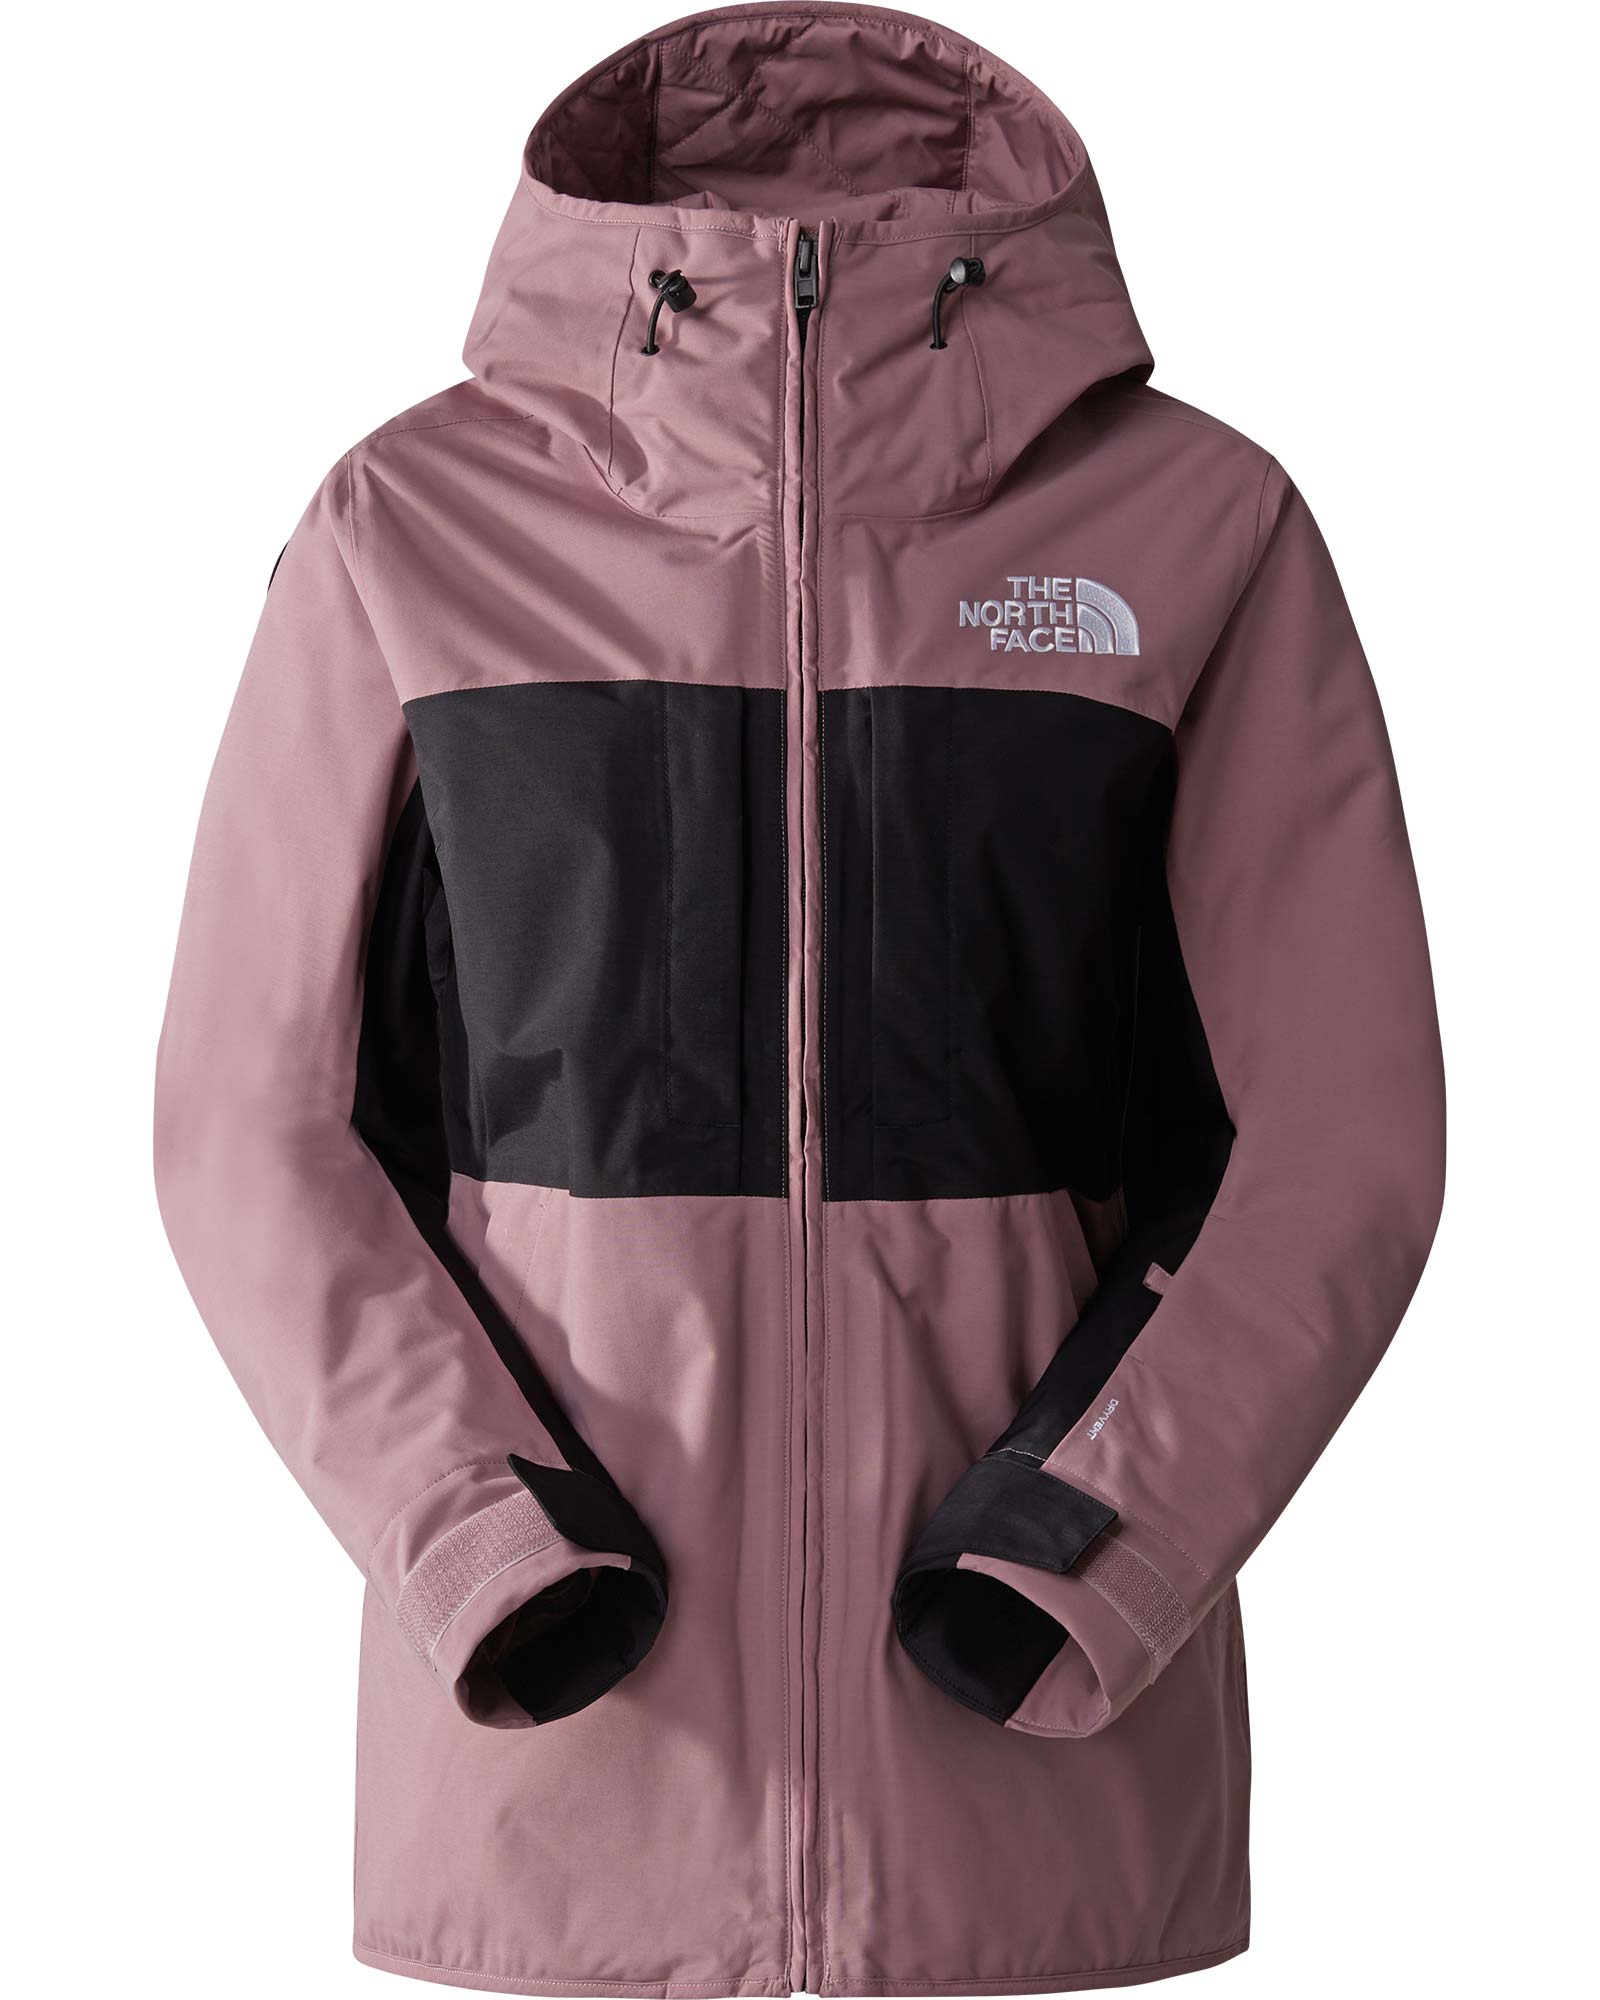 The North Face Women’s Namak Insulated Jacket - Fawn Grey/TNF Black L